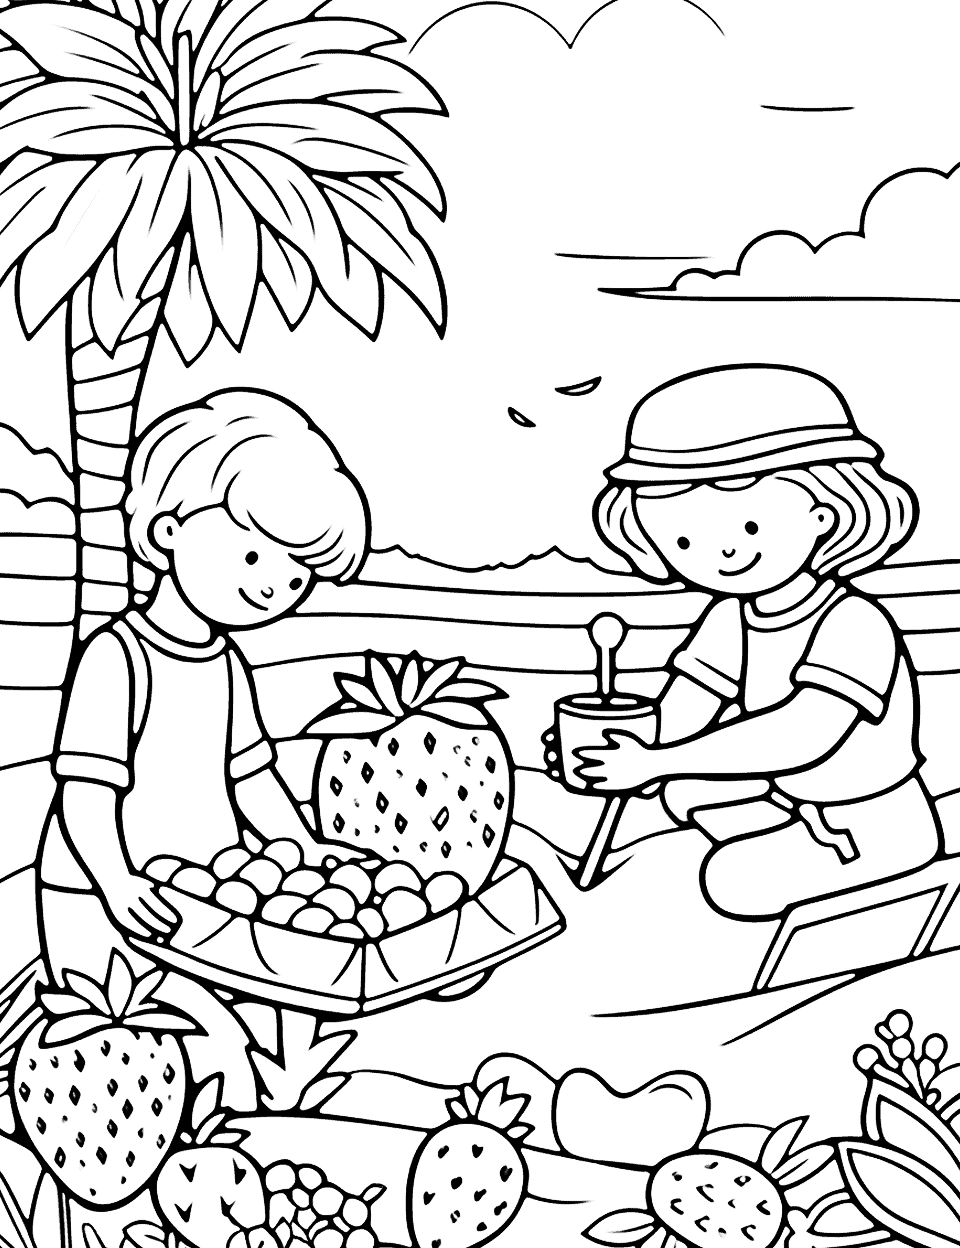 Berry Picking Fun Summer Coloring Page - A family picking summer berries like strawberries, blueberries, and raspberries in a lush garden.